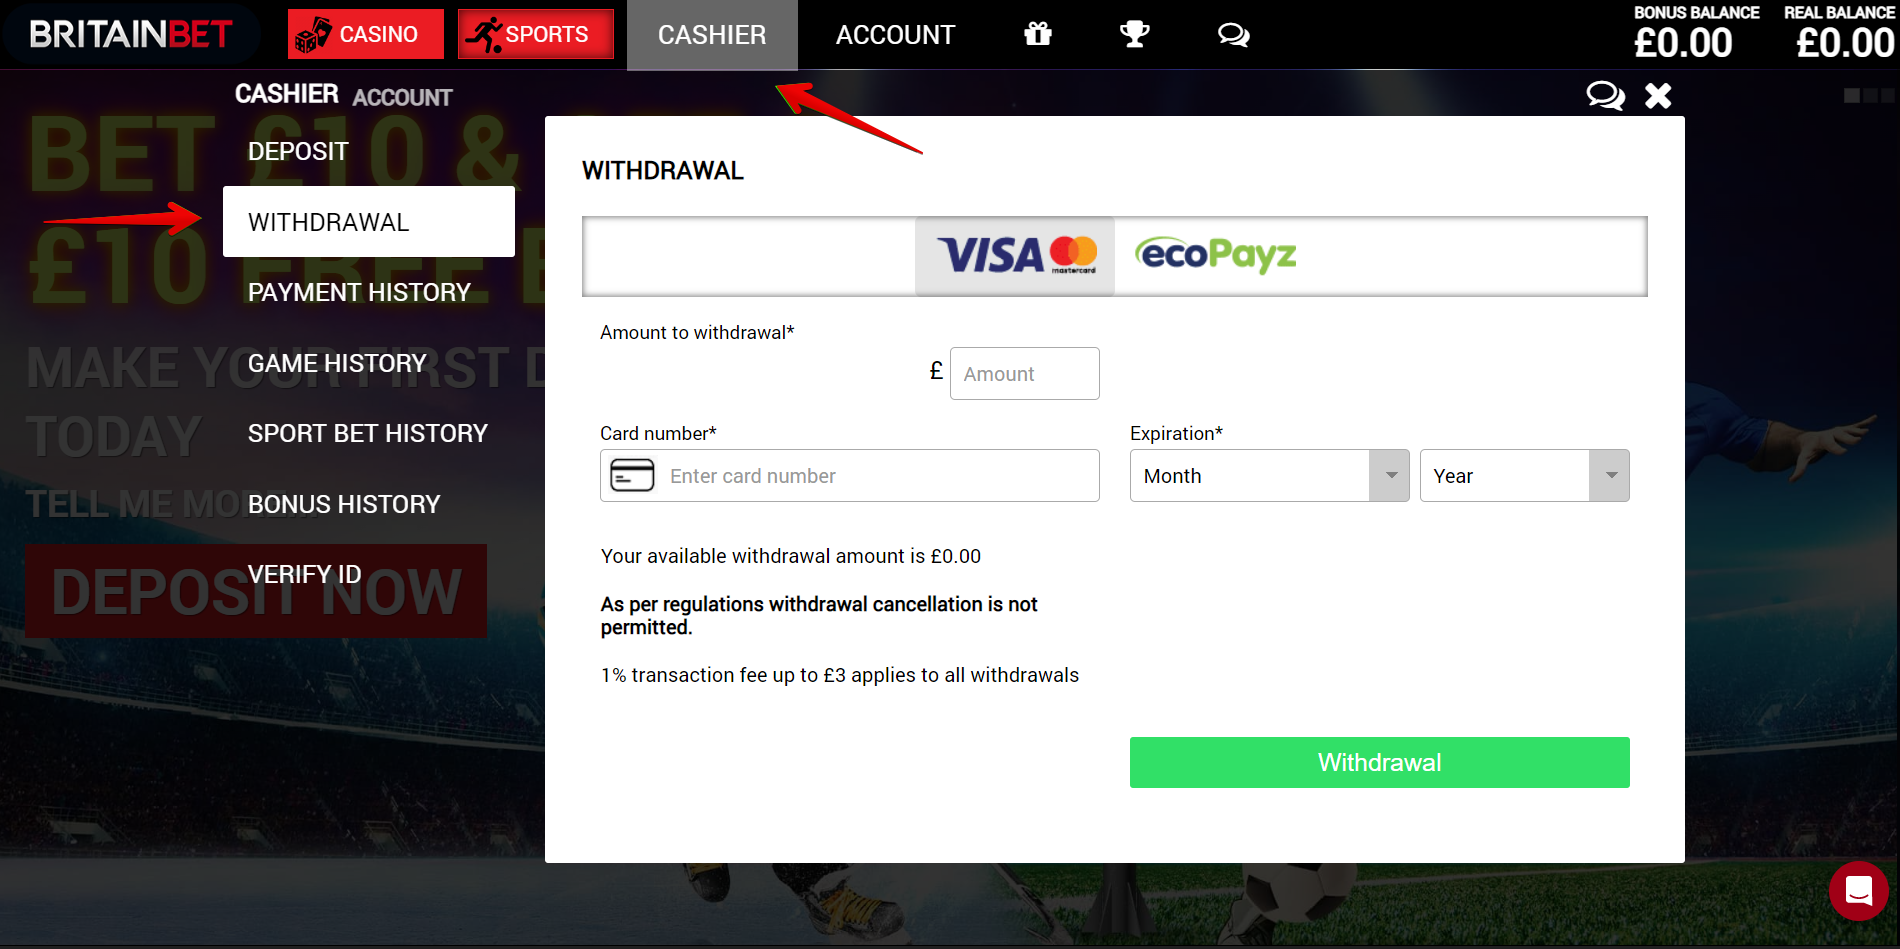 Click on the “Withdrawal” option